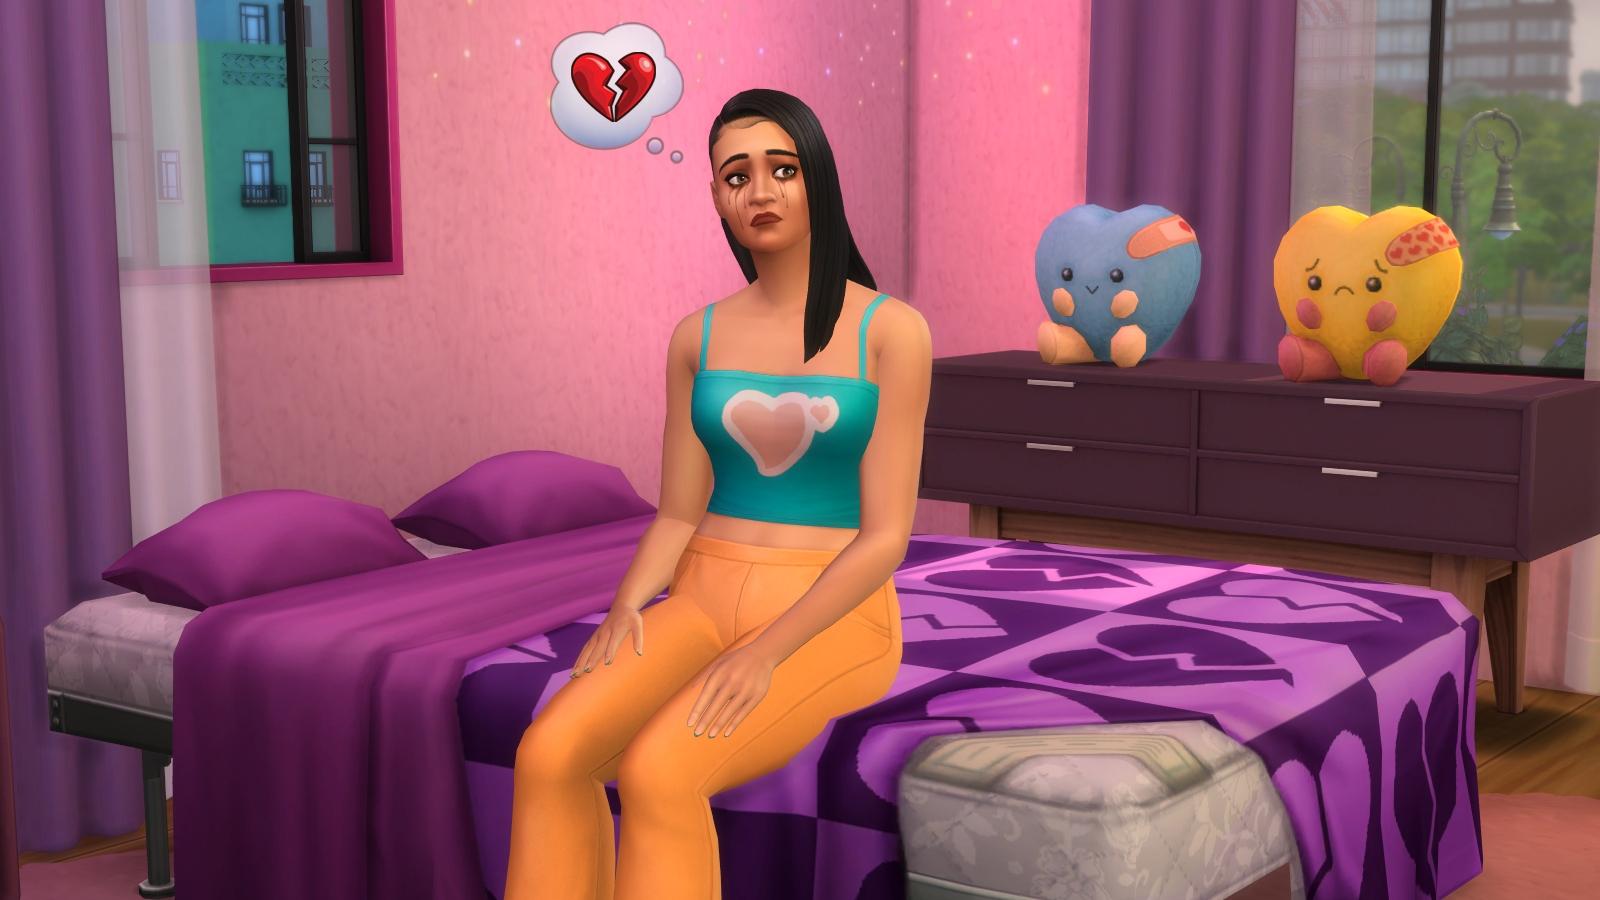 A brokenhearted Sims in the Lovestruck expansion